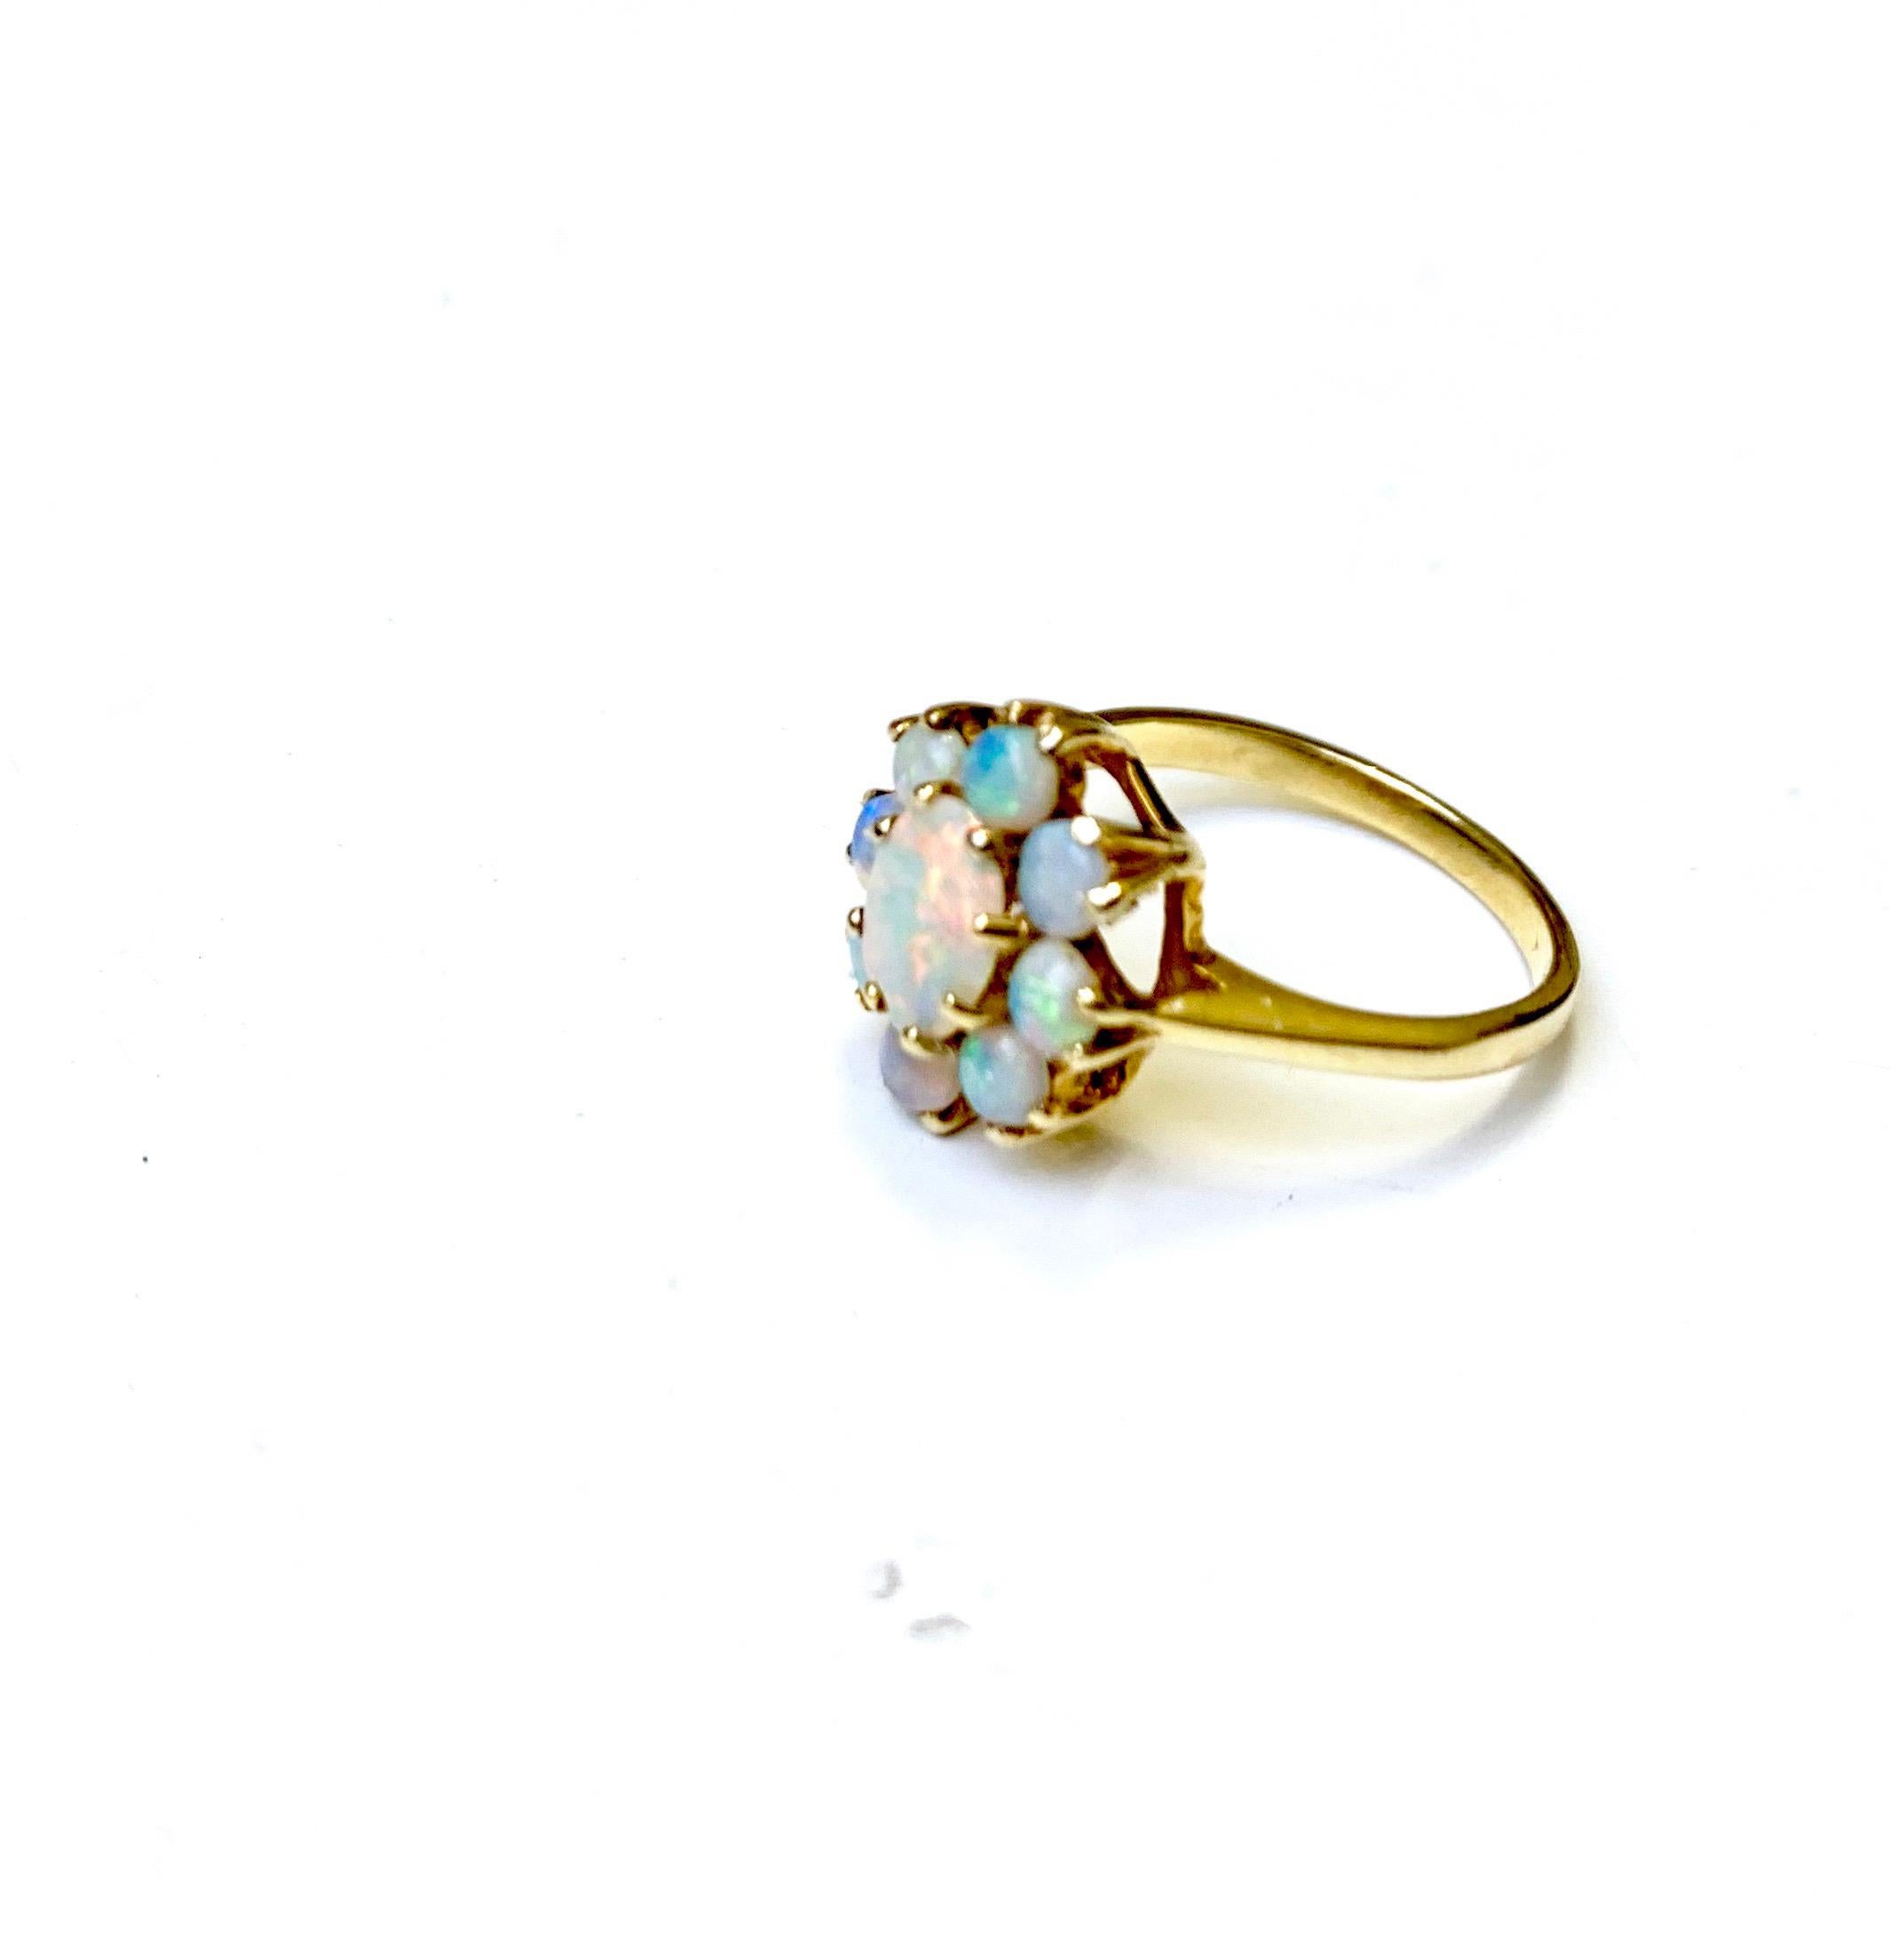 2ctw. opal ring has nine stones total.  The center stone is 6x4mm and 3mm opal cabochons set in 14k yellow gold.  The ring is cast from 14k yellow gold and sized currently to a 5 but can be sized once purchased.  The ring is dated to the Victorian